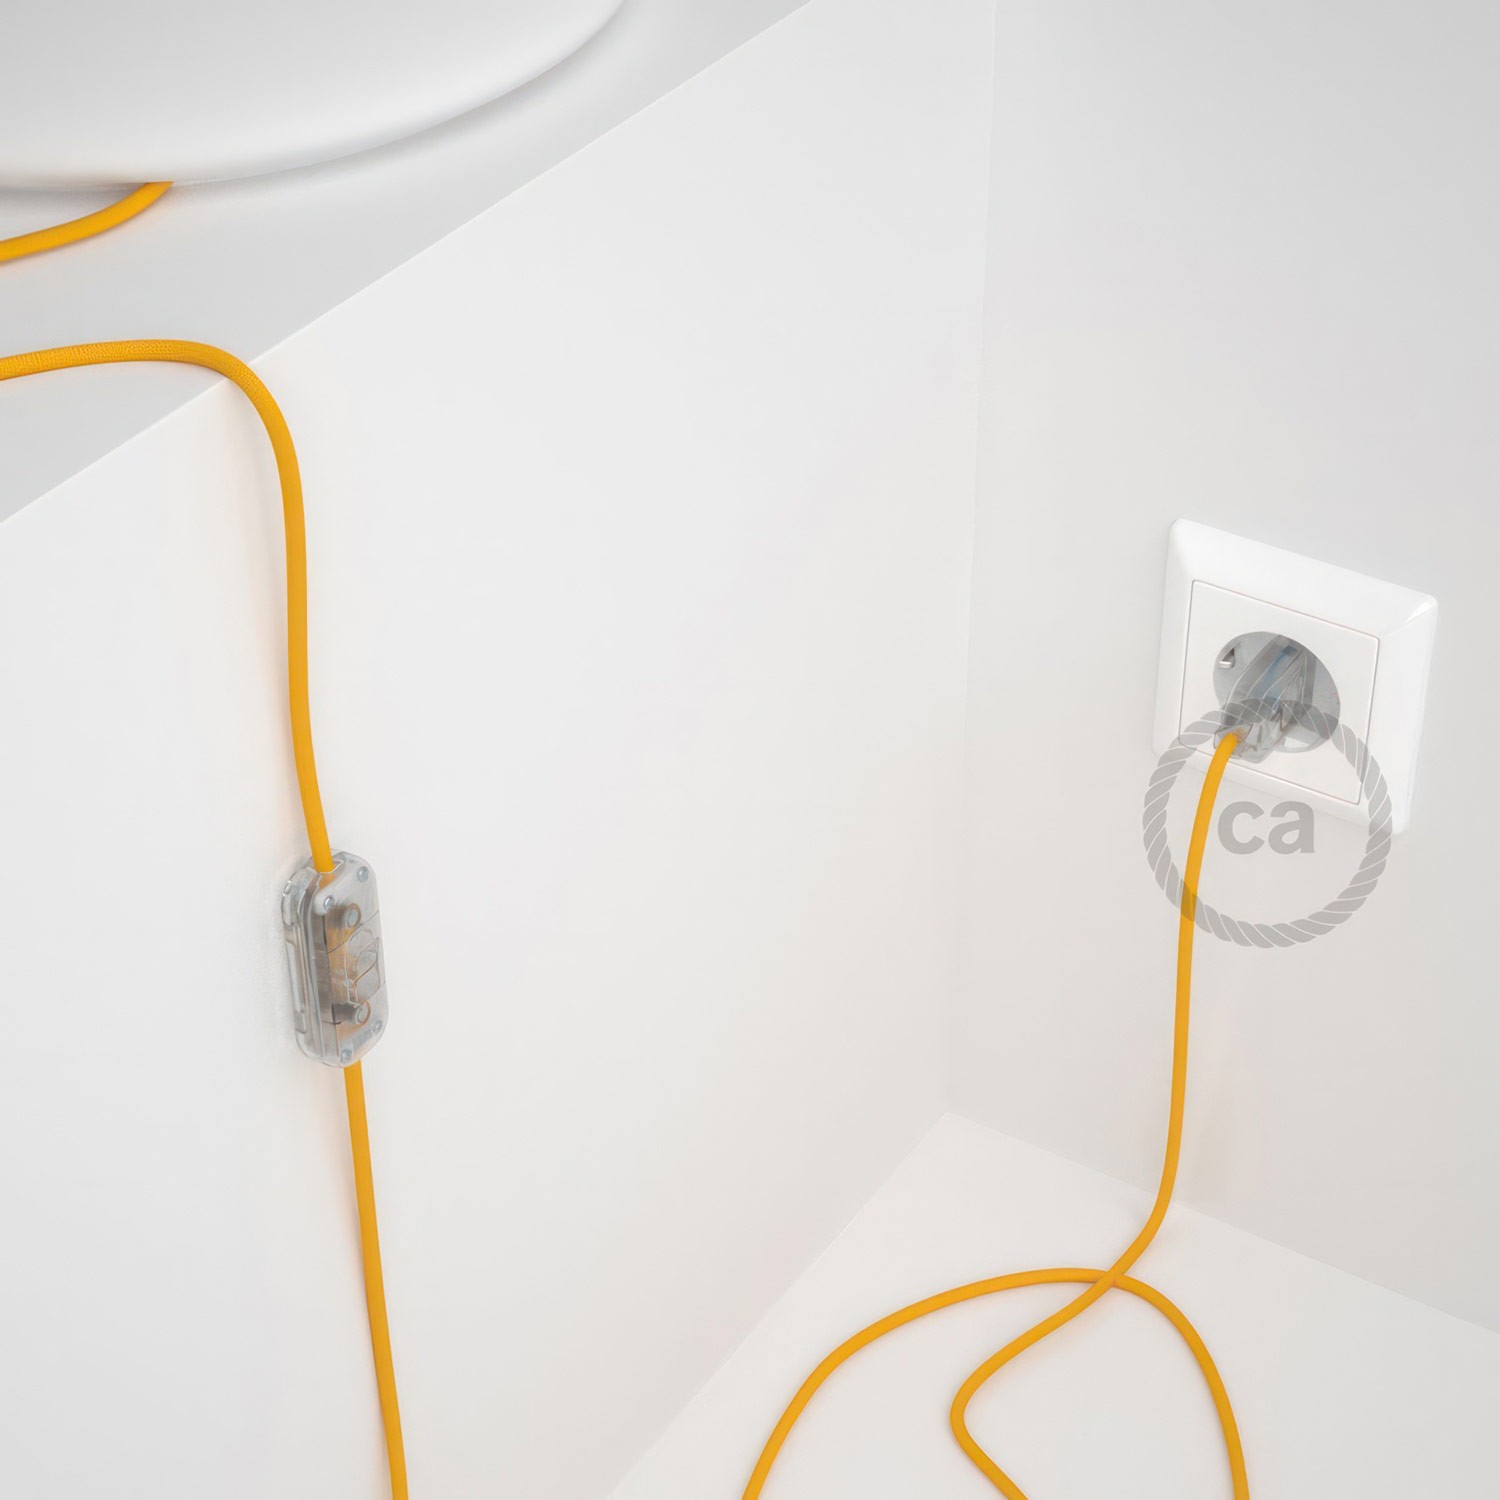 Lamp wiring, RM10 Yellow Rayon 1,80 m. Choose the colour of the switch and plug.